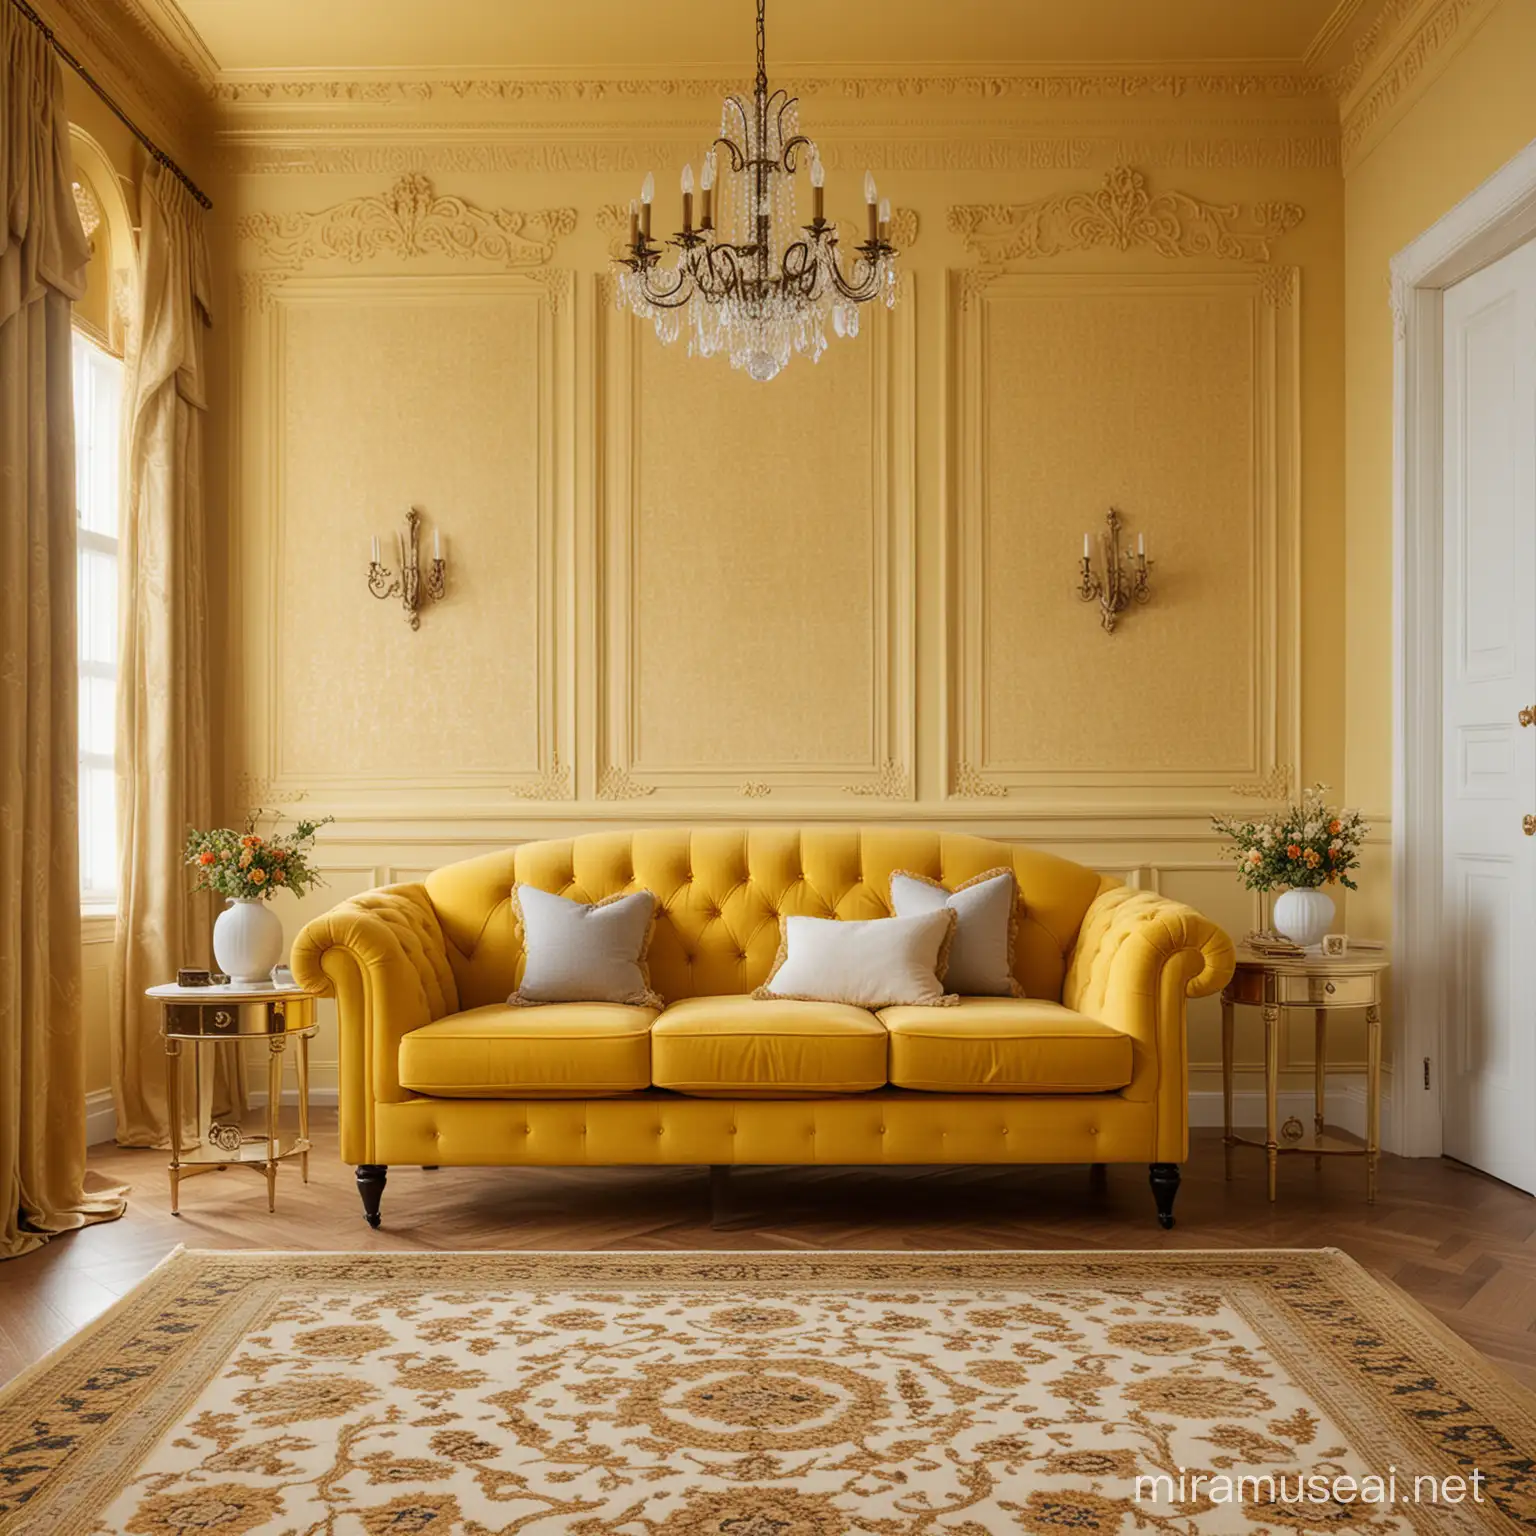 A stunning high-definition studio photo of a tastefully decorated room, featuring yellow and gold wainscoting. In the foreground, there is a plush sofa positioned, a intricately patterned carpet, a tall standing lamp and no any table. The overall atmosphere of the image exudes a sense of serenity and calmness, creating an inviting and soothing ambiance.